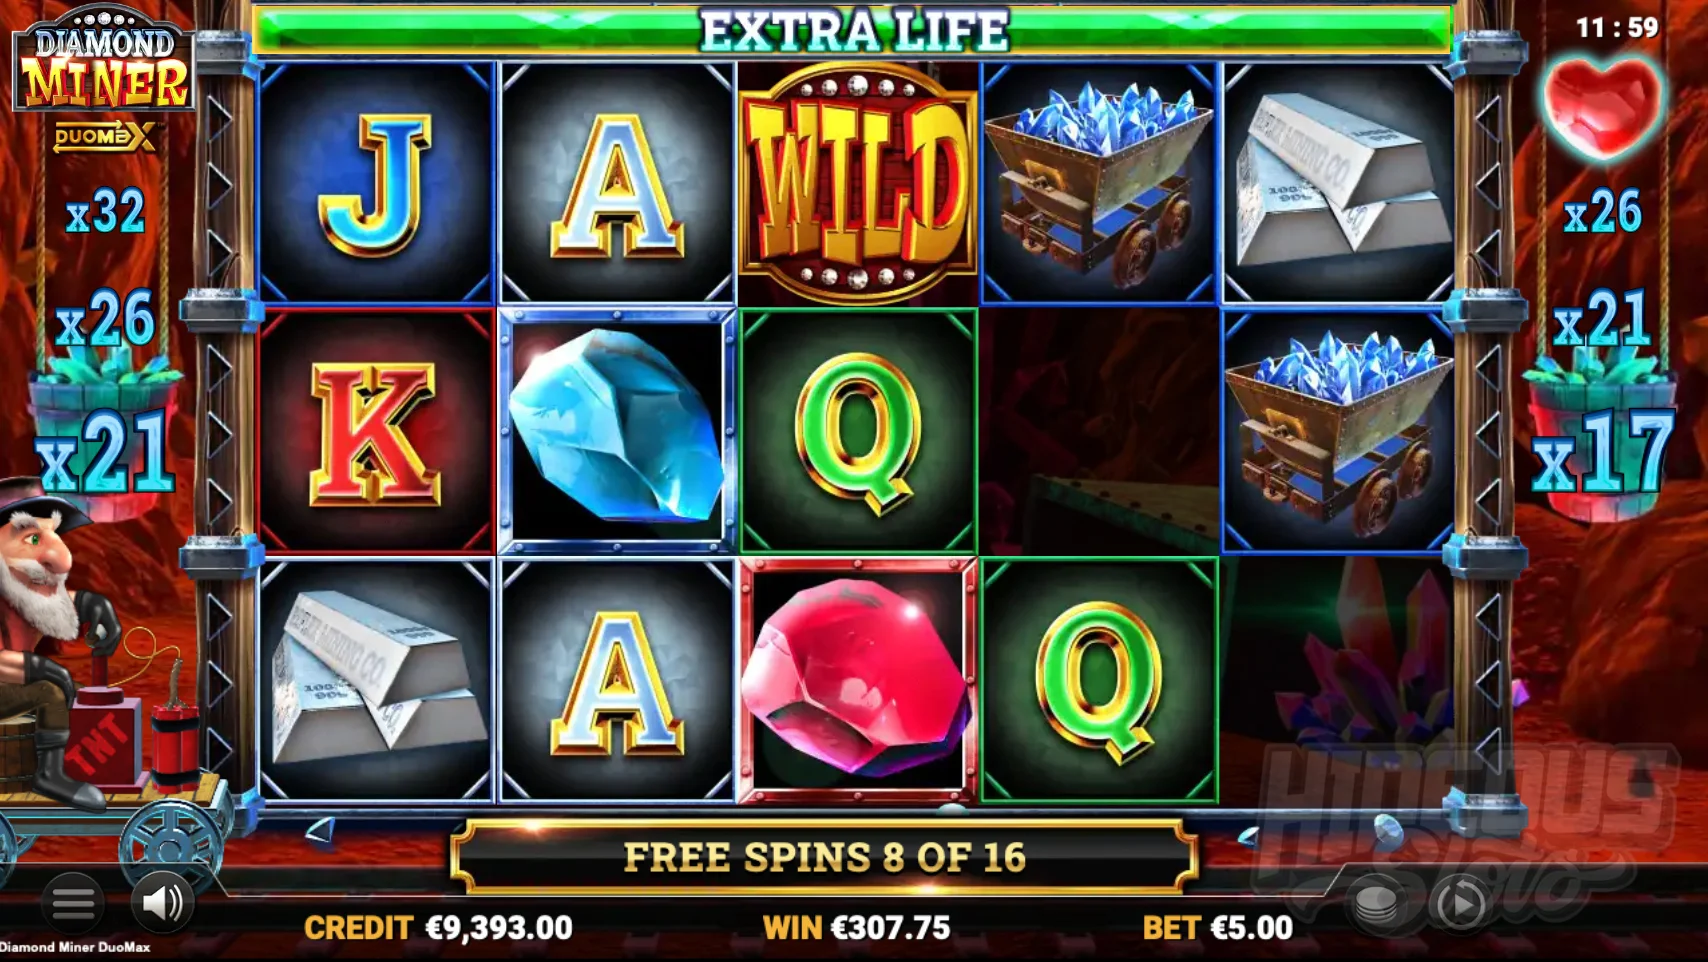 Reel Multipliers Do Not Reset During Free Spins